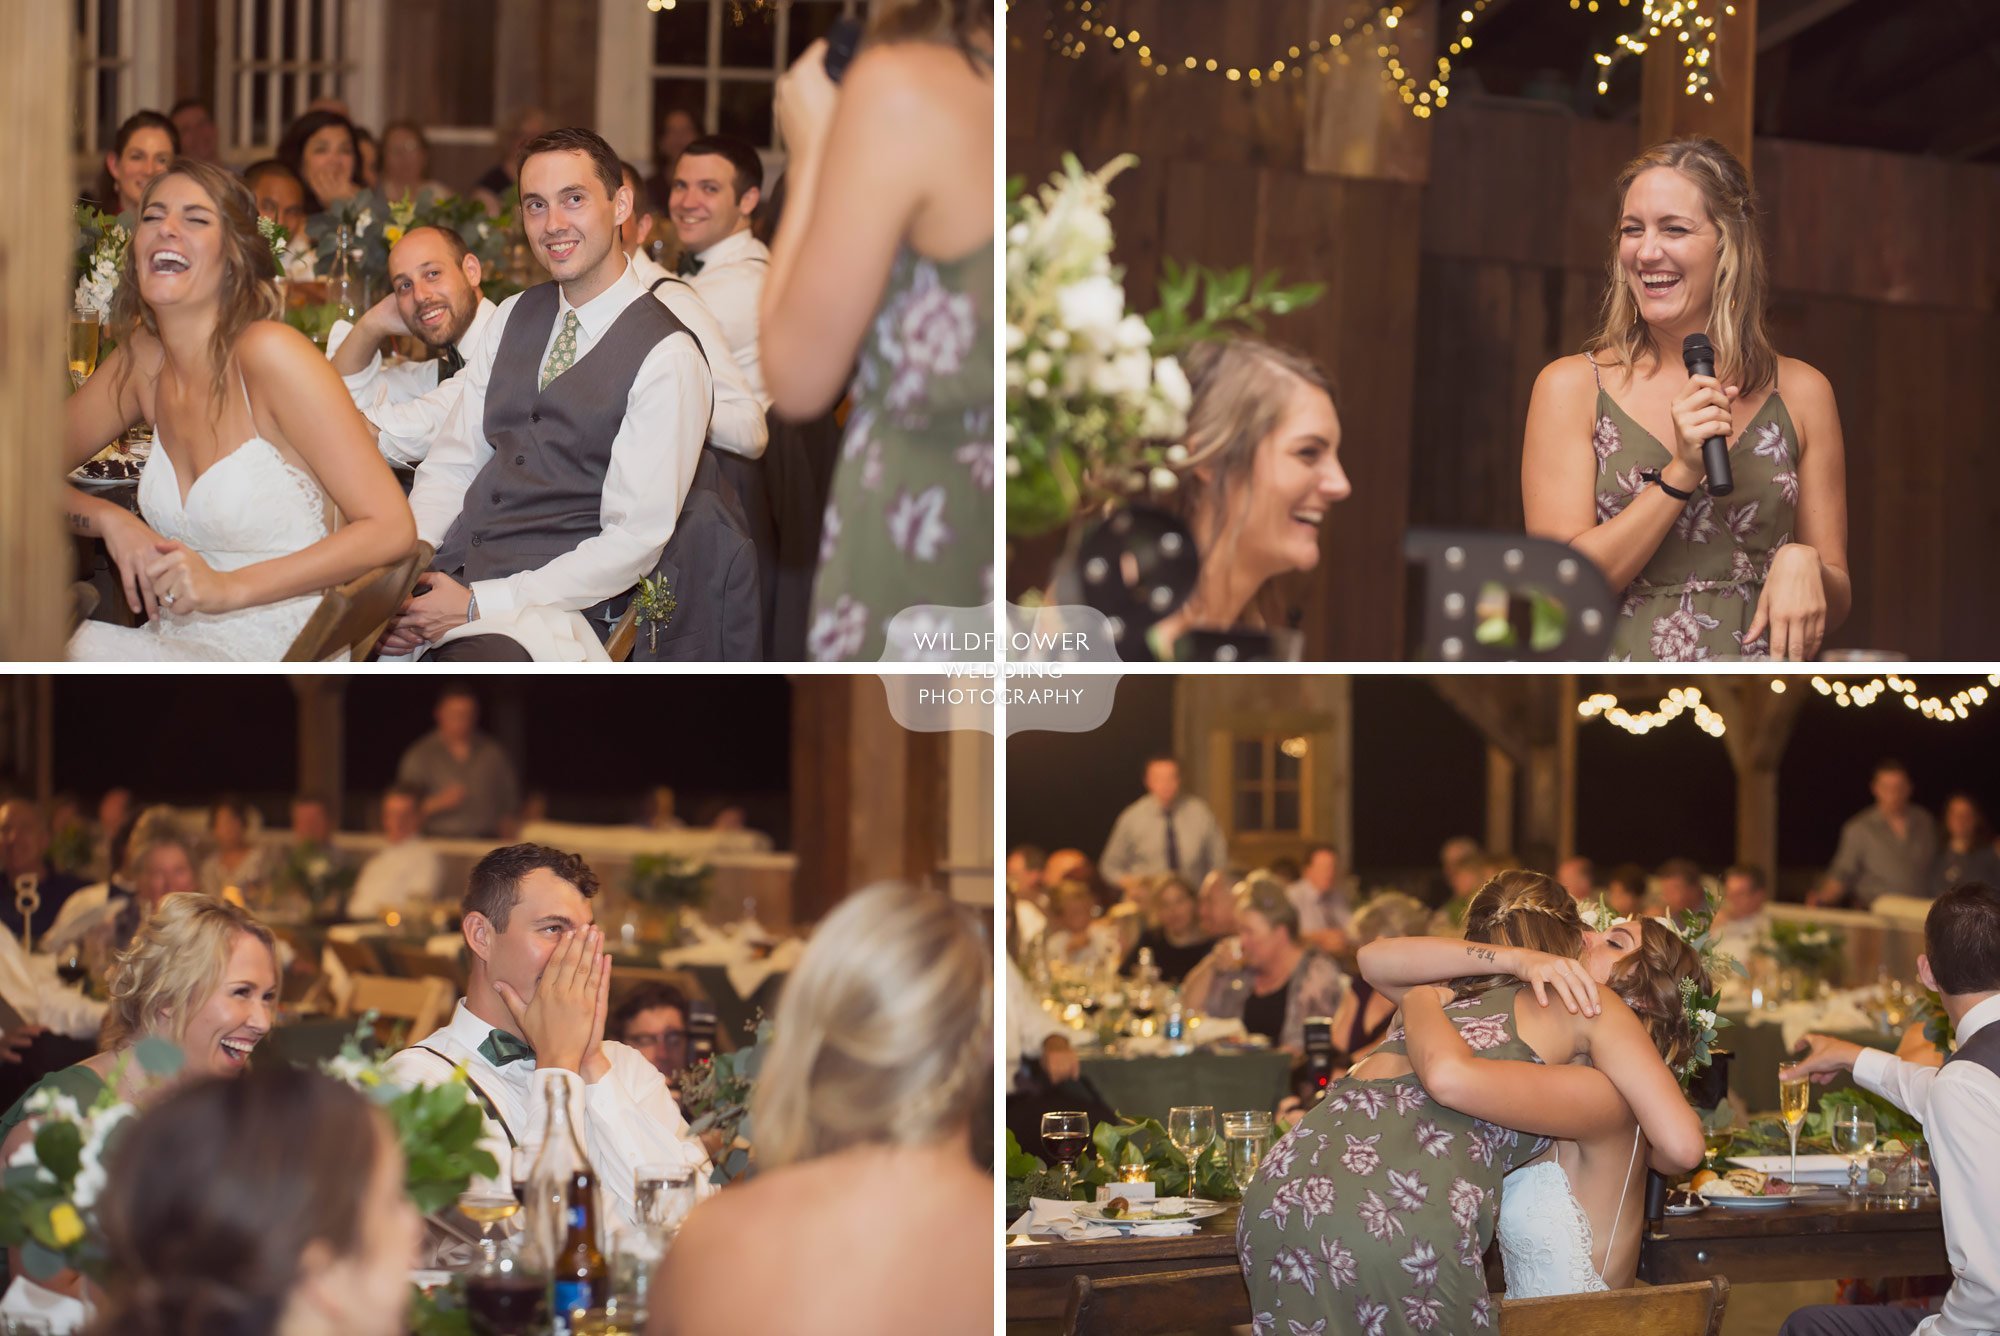 Natural photos of wedding speeches inside of the old barn at the Weston Farm.